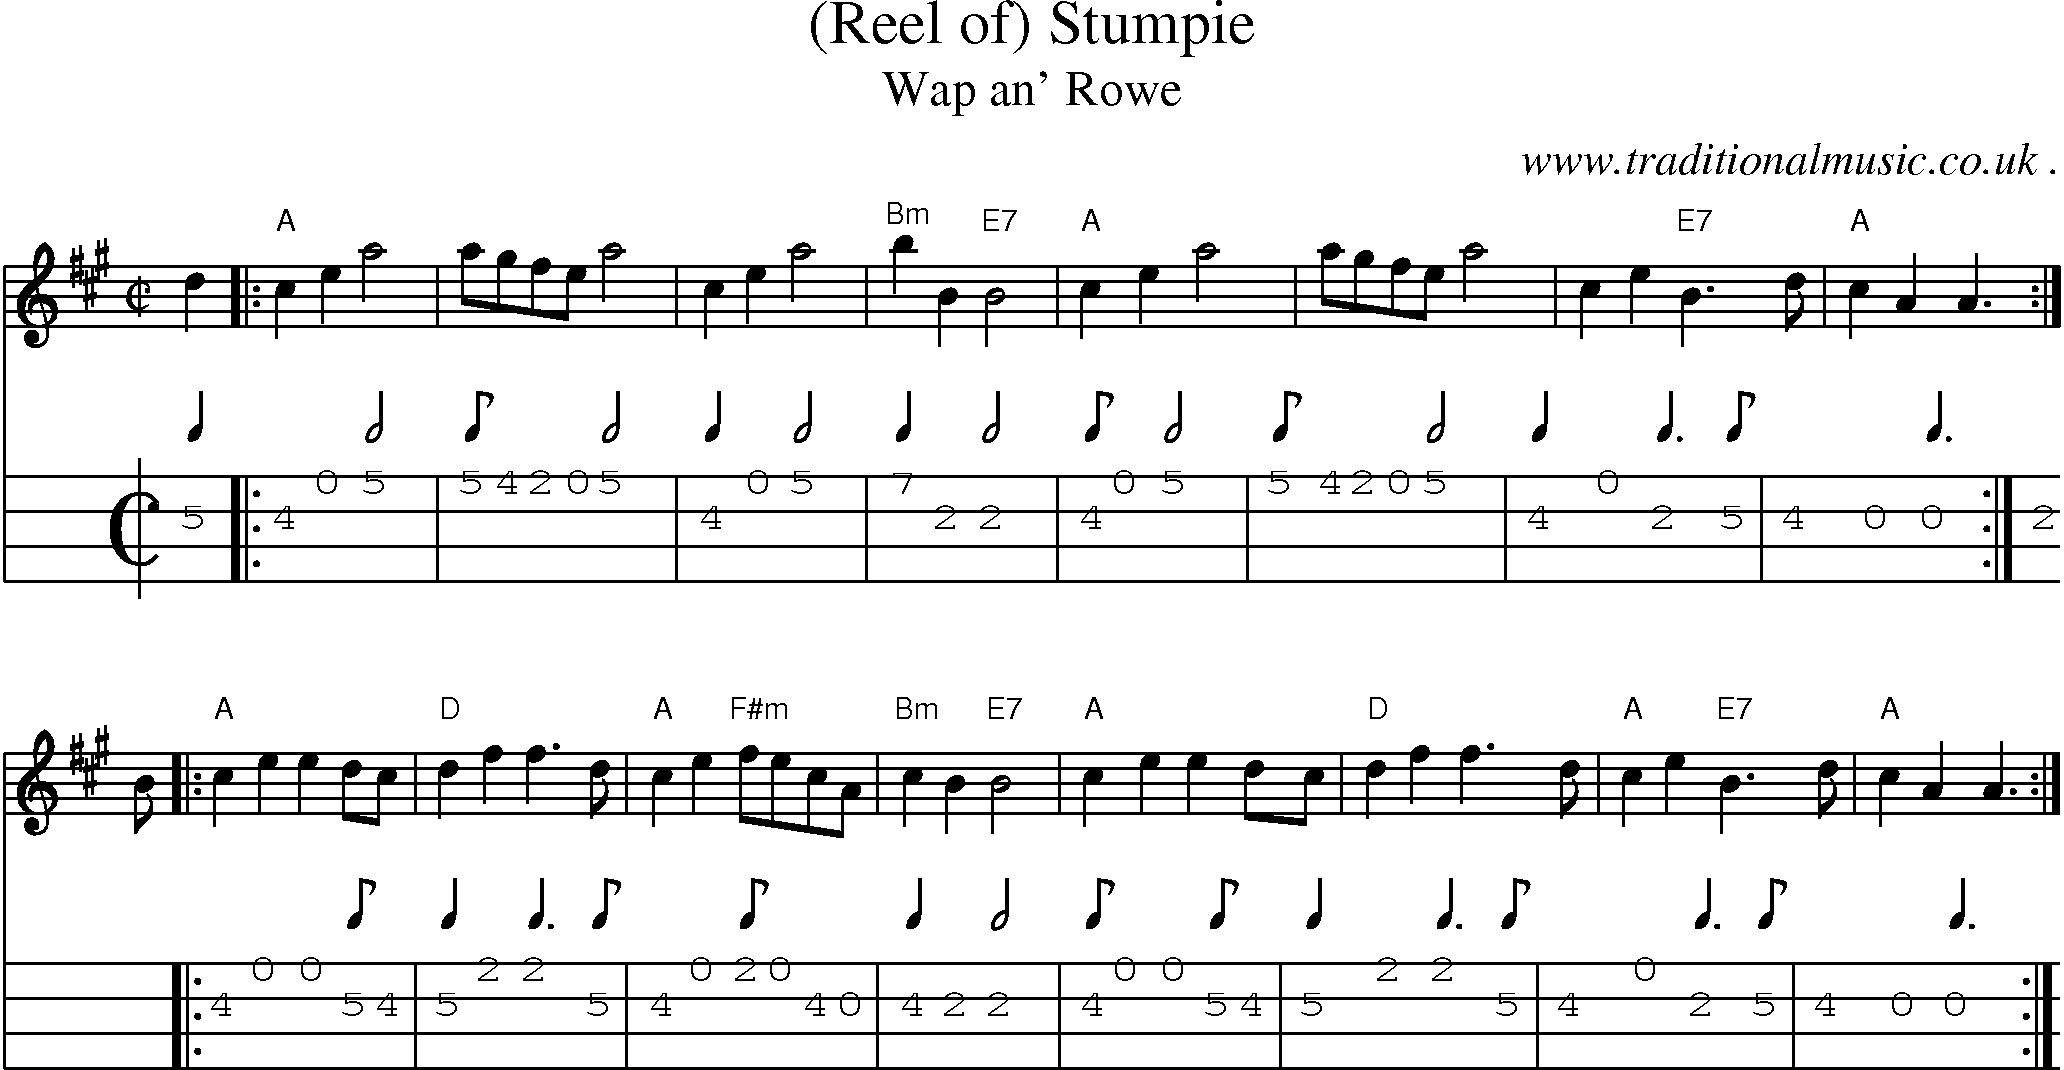 Sheet-music  score, Chords and Mandolin Tabs for Reel Of Stumpie